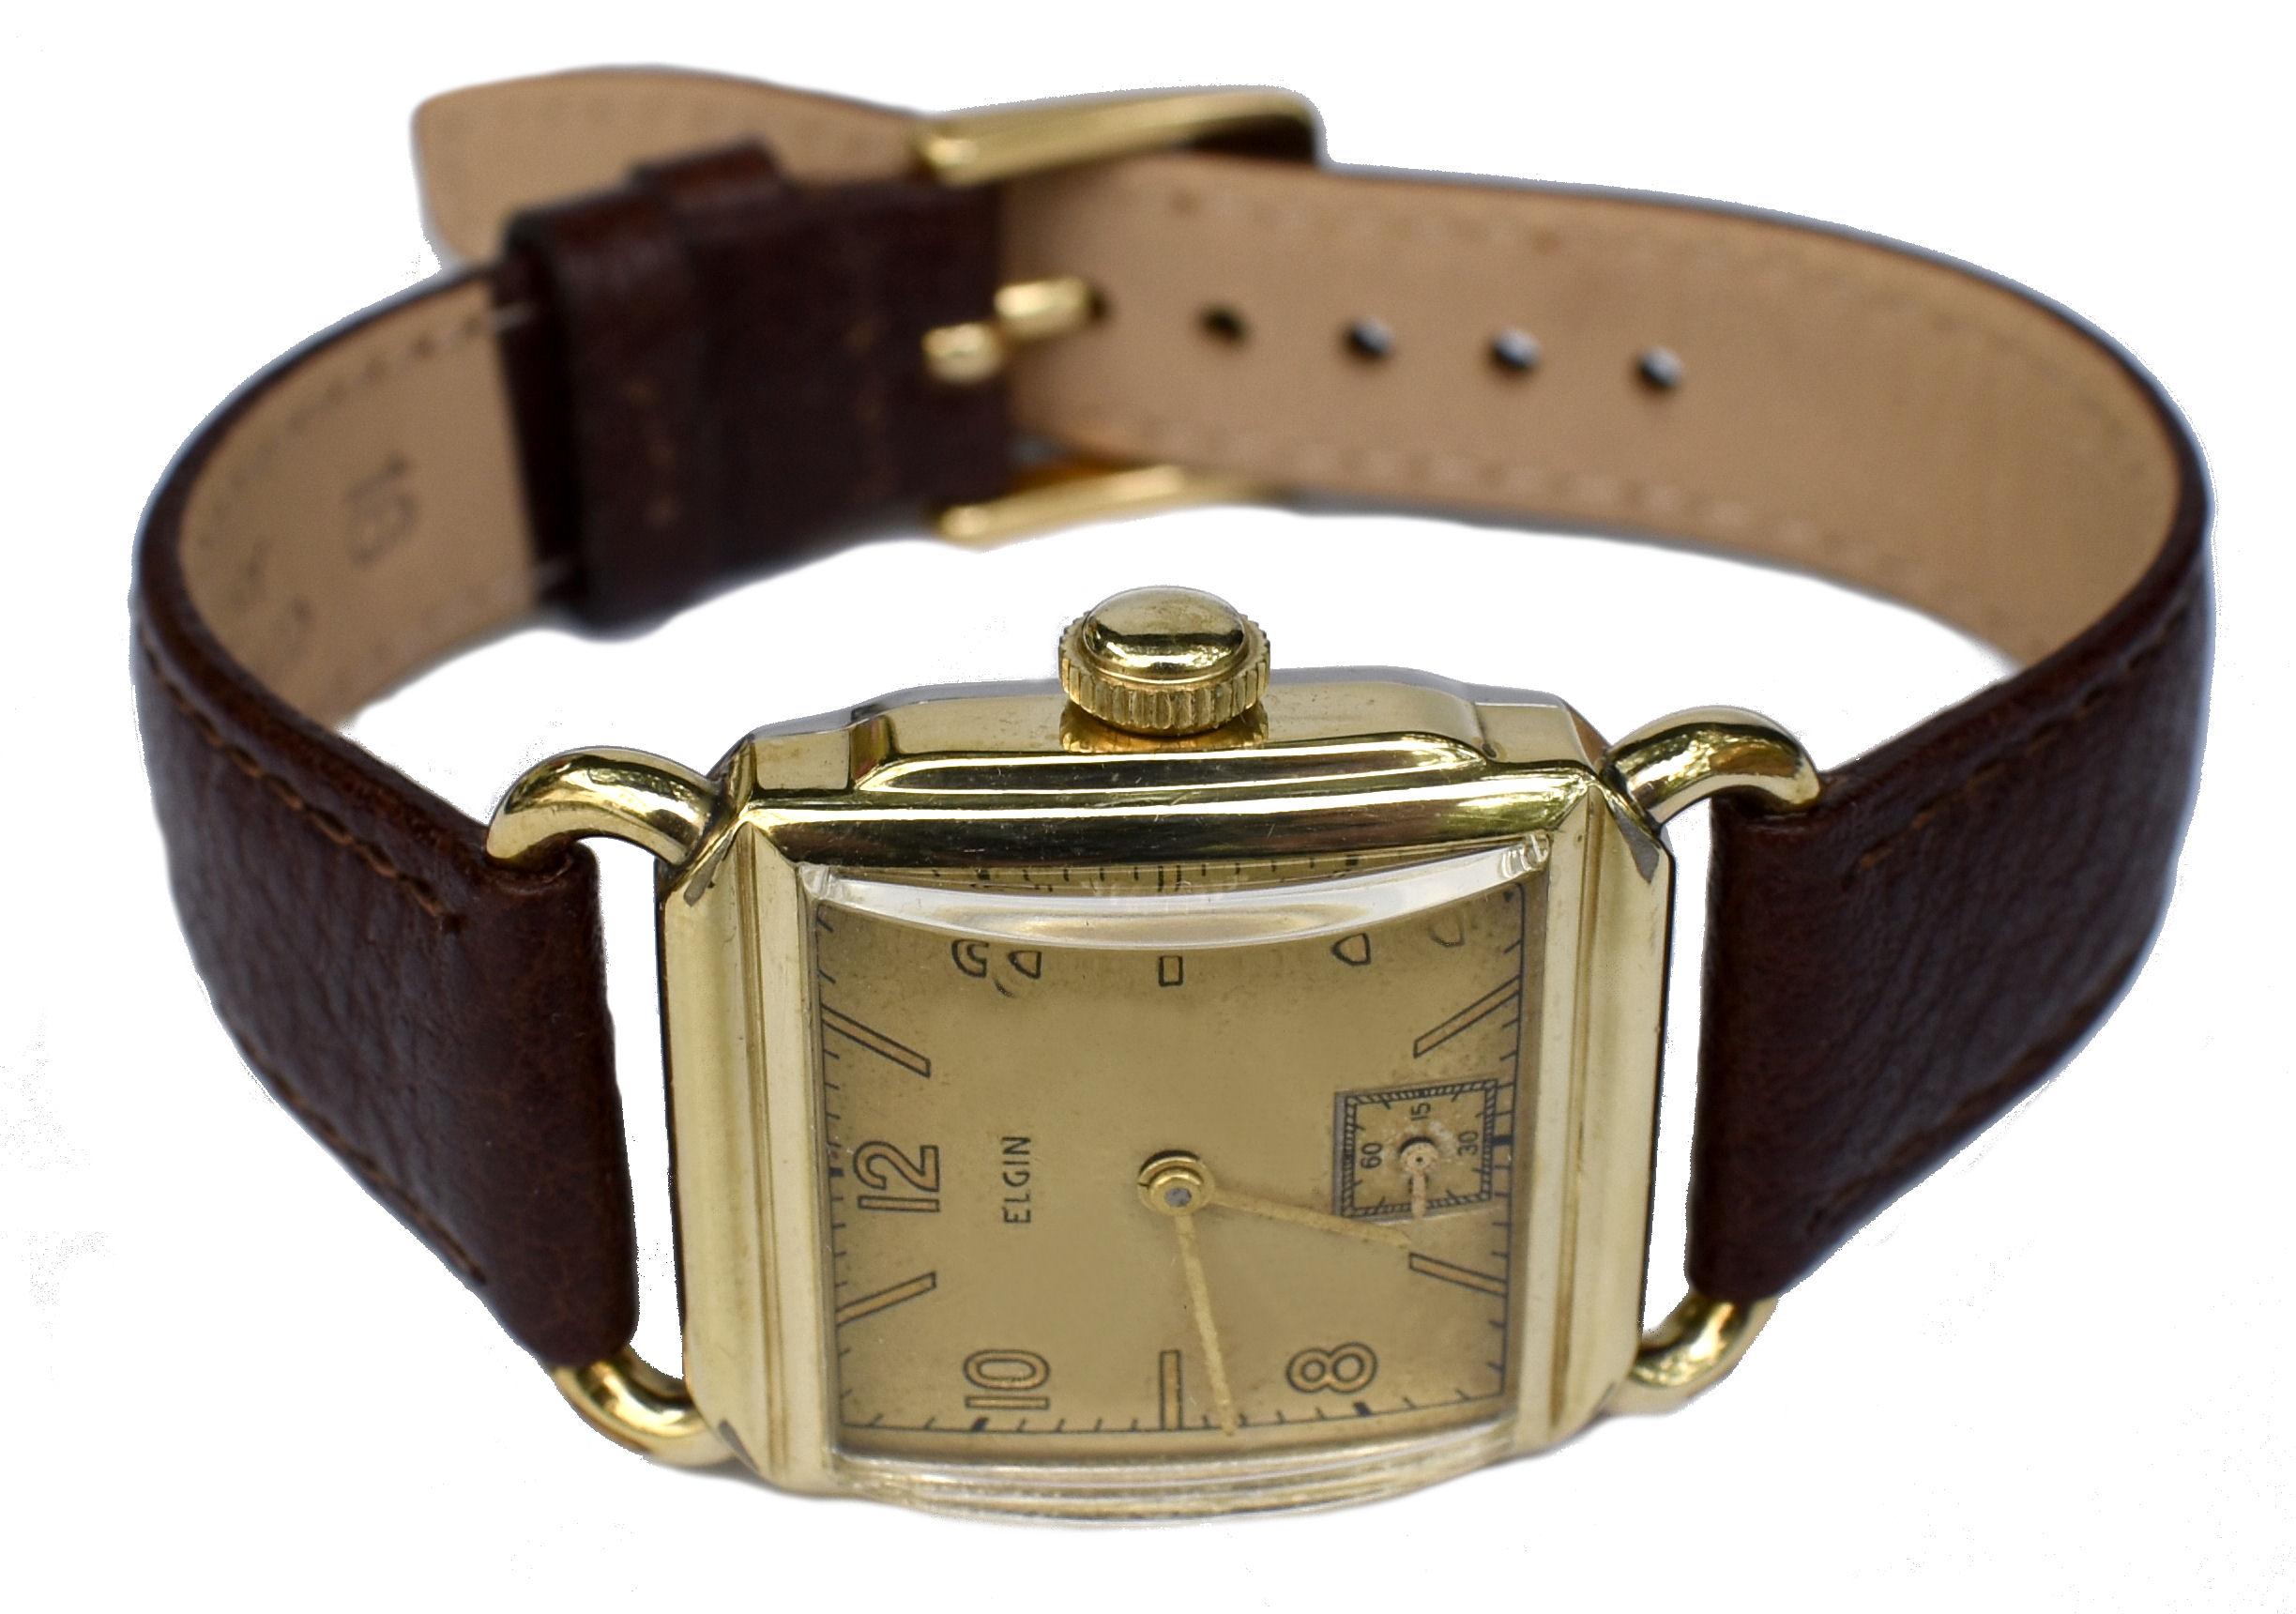 Art Deco 10k Gold Filled Gents Wrist Watch By Elgin, Fully Serviced , c1946 For Sale 5